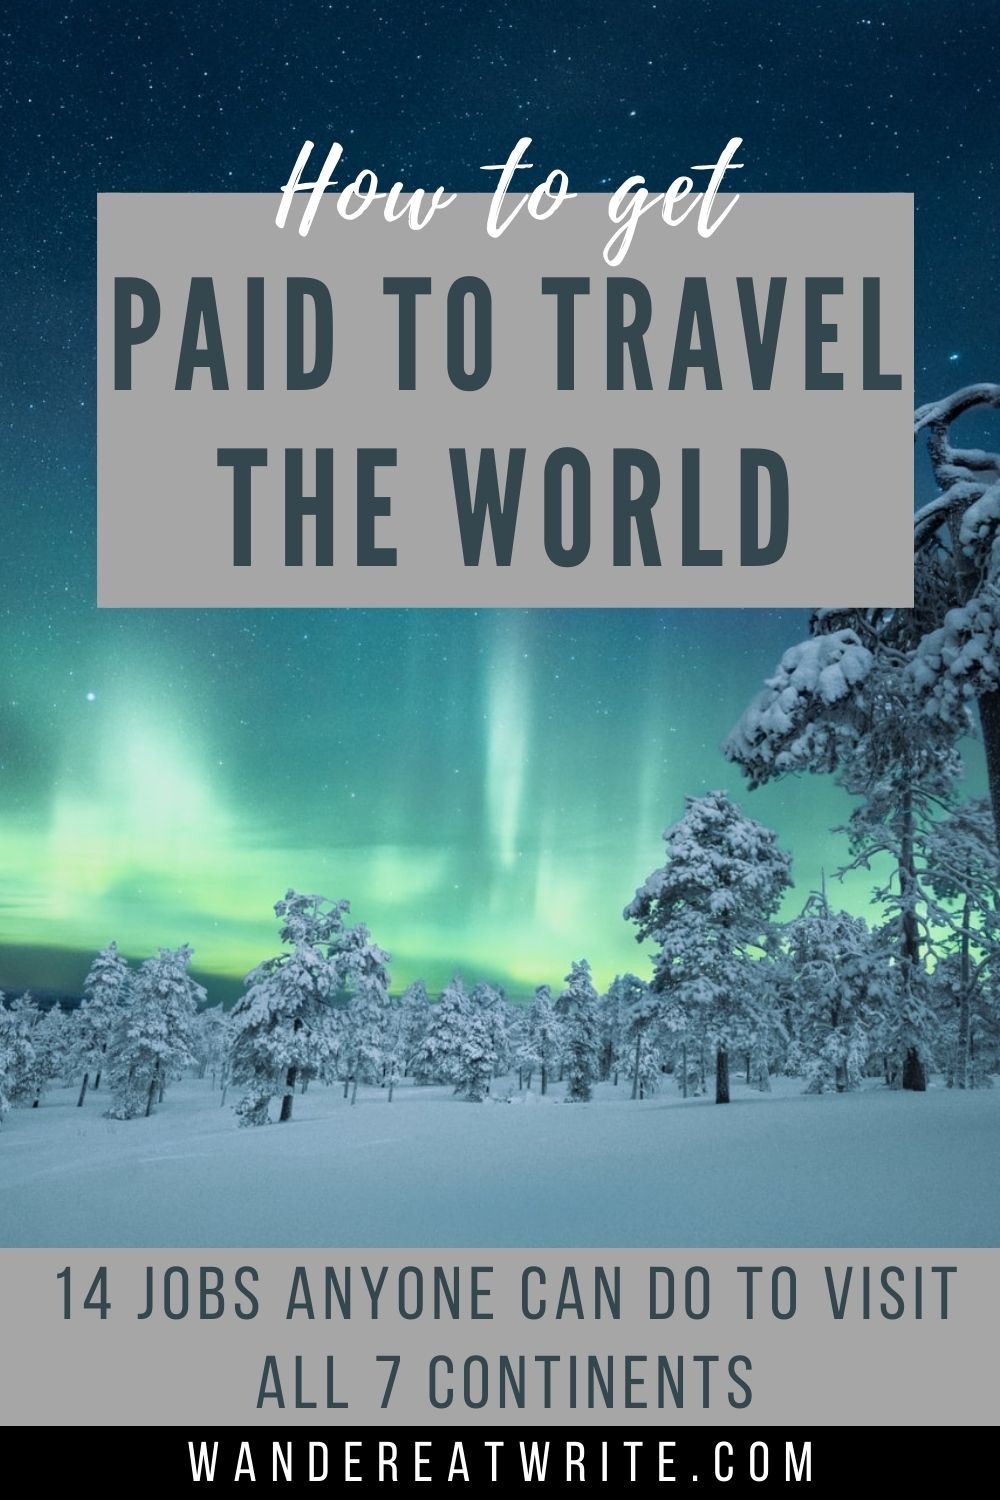 Text: how to get paid to travel the world; photo: northern lights and snowy landscape and snowy trees in Finland winter